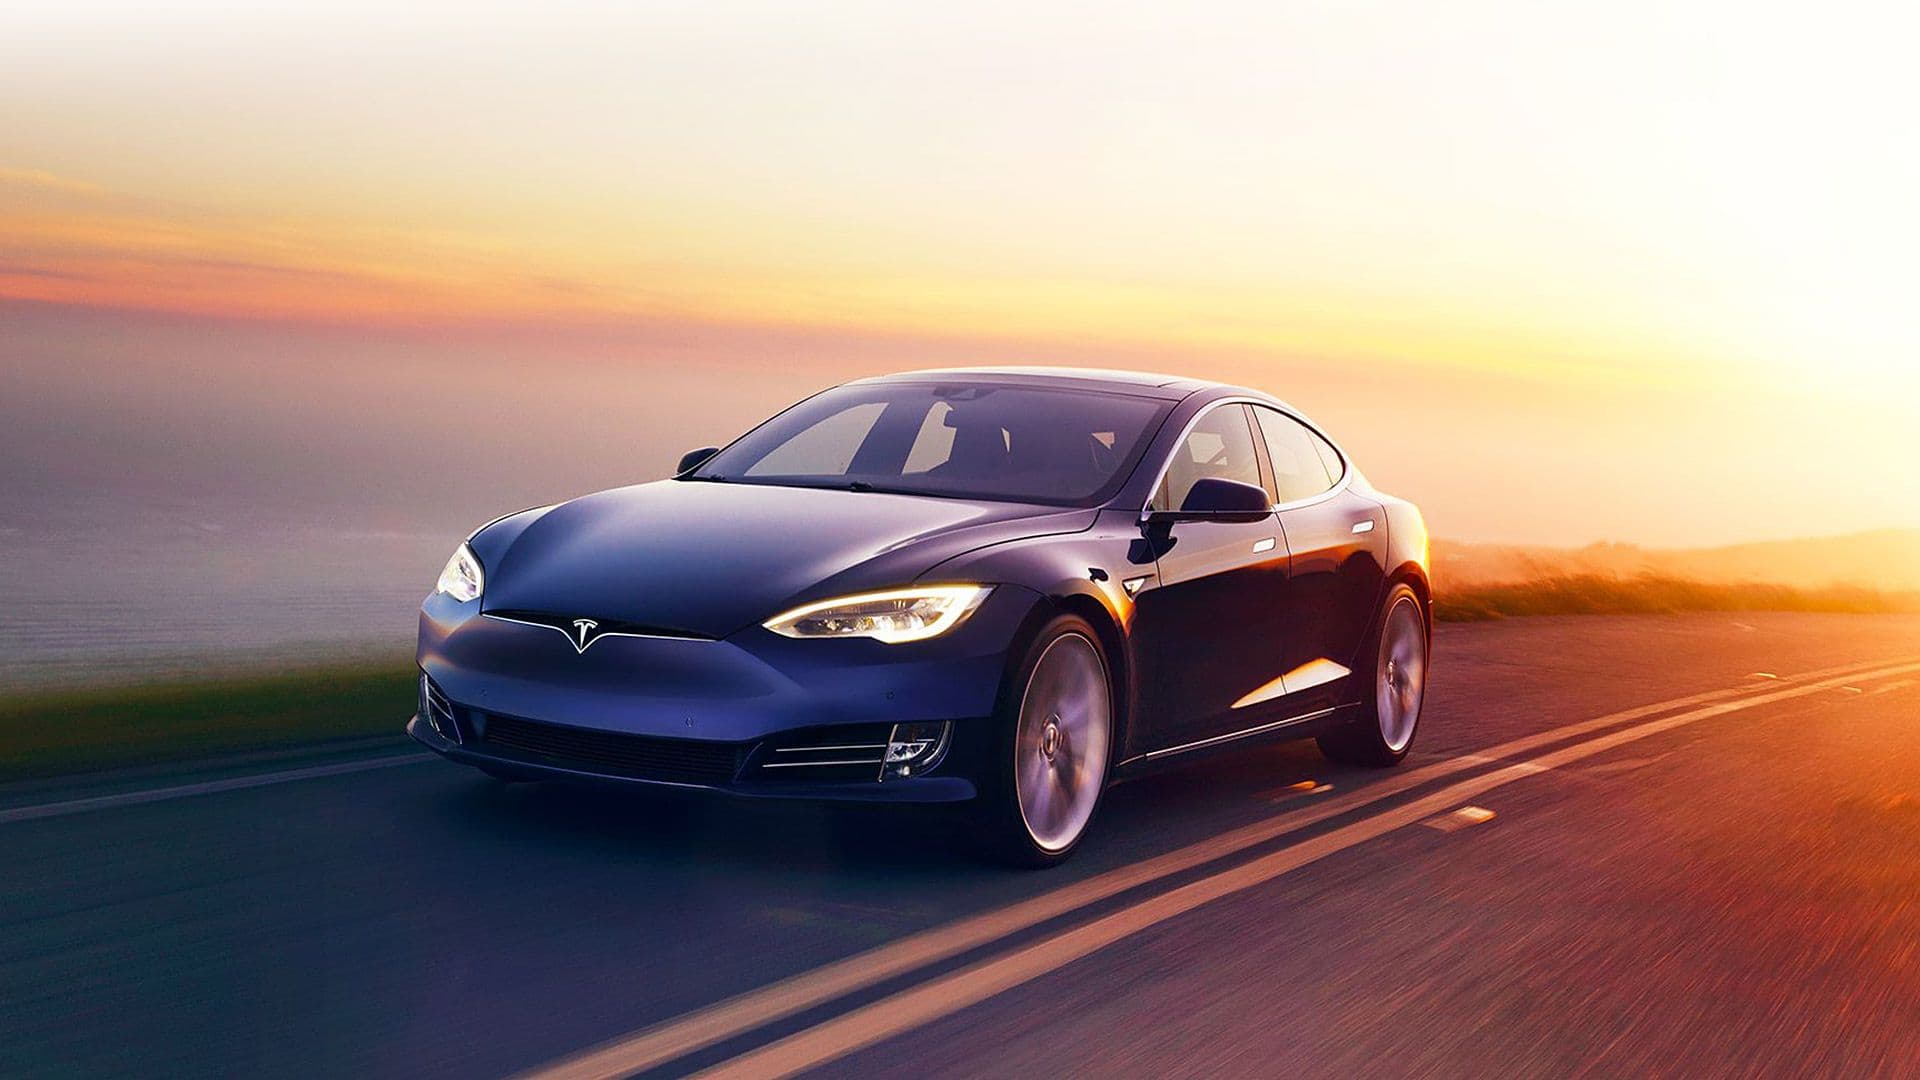 Refreshed Tesla Model S Will Boast 400-Mile Range, Charge 50 Percent Faster: Report